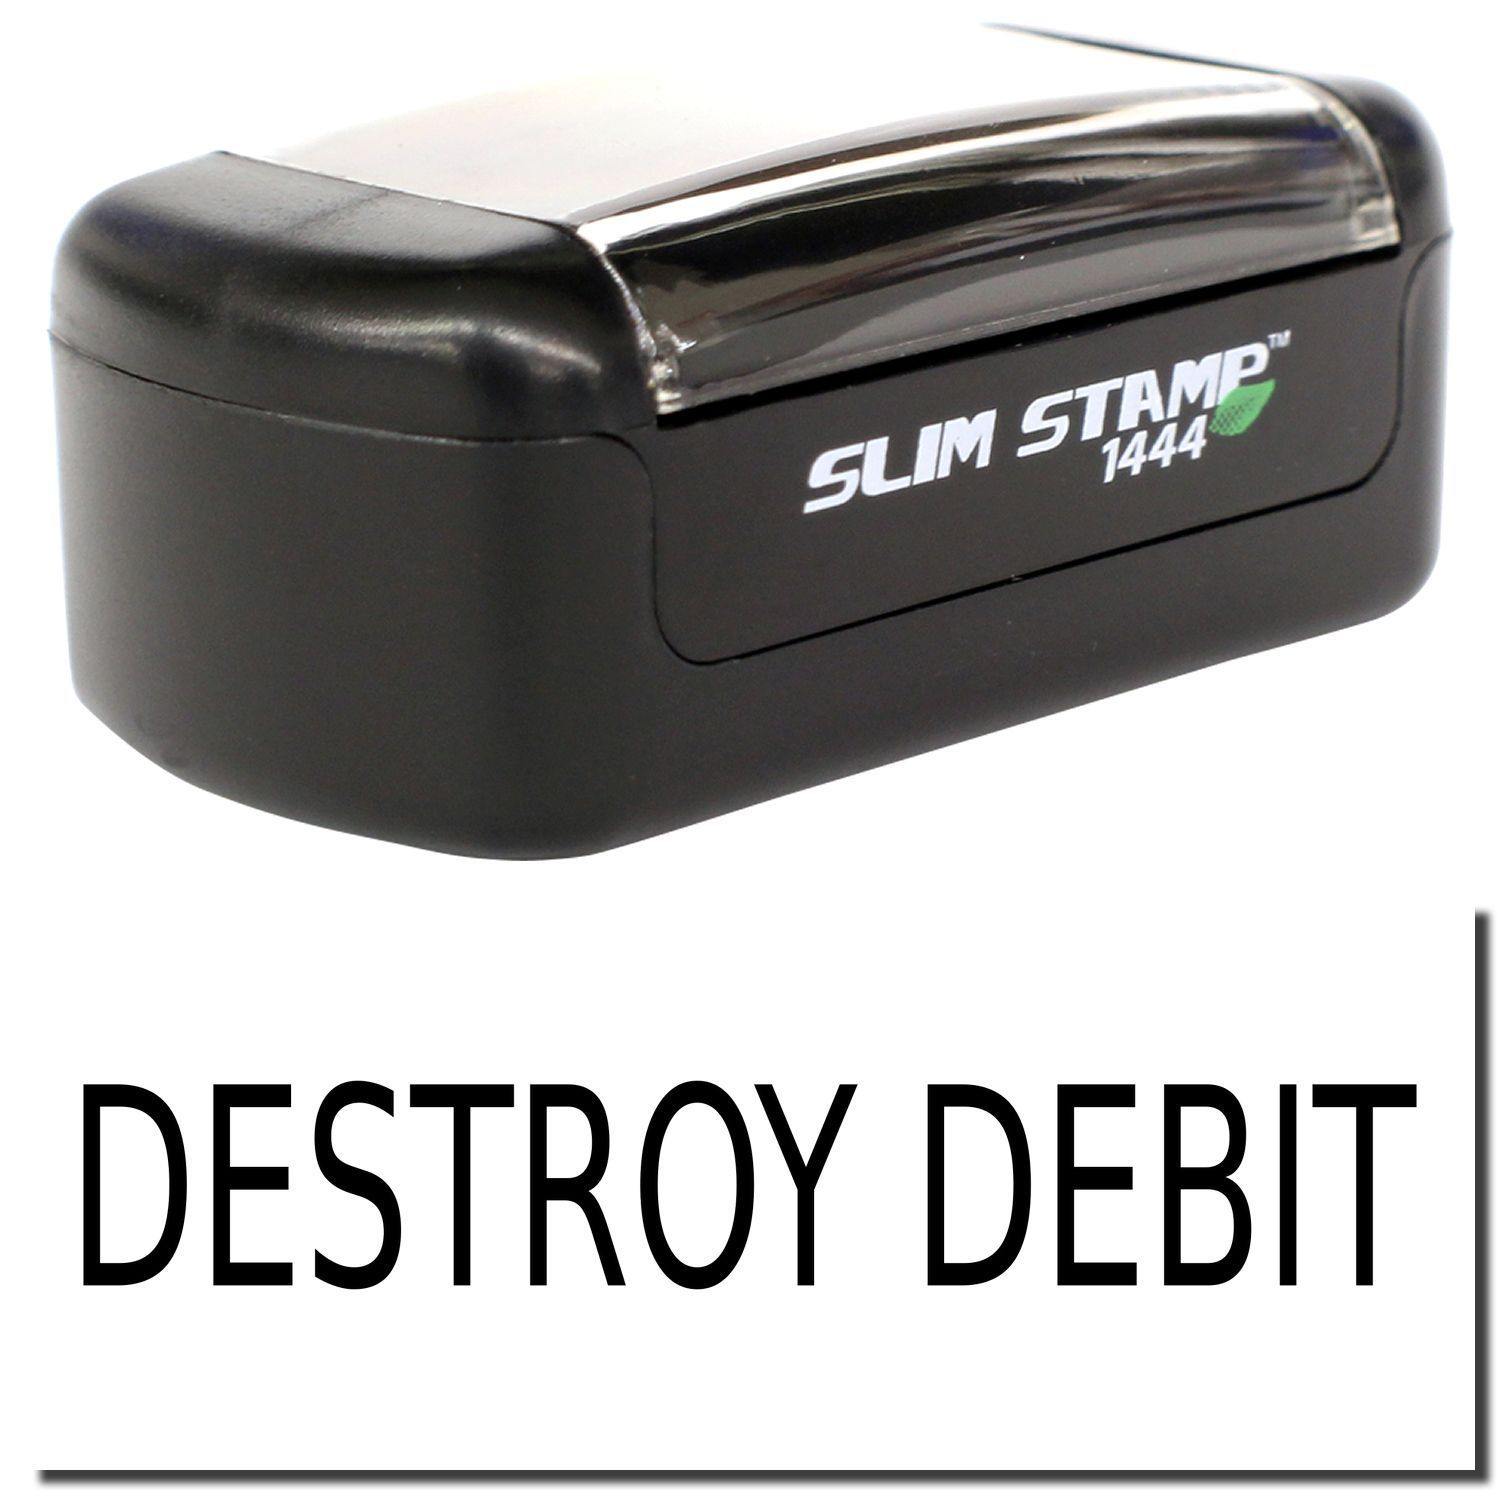 A stock office pre-inked stamp with a stamped image showing how the text "DESTROY DEBIT" is displayed after stamping.